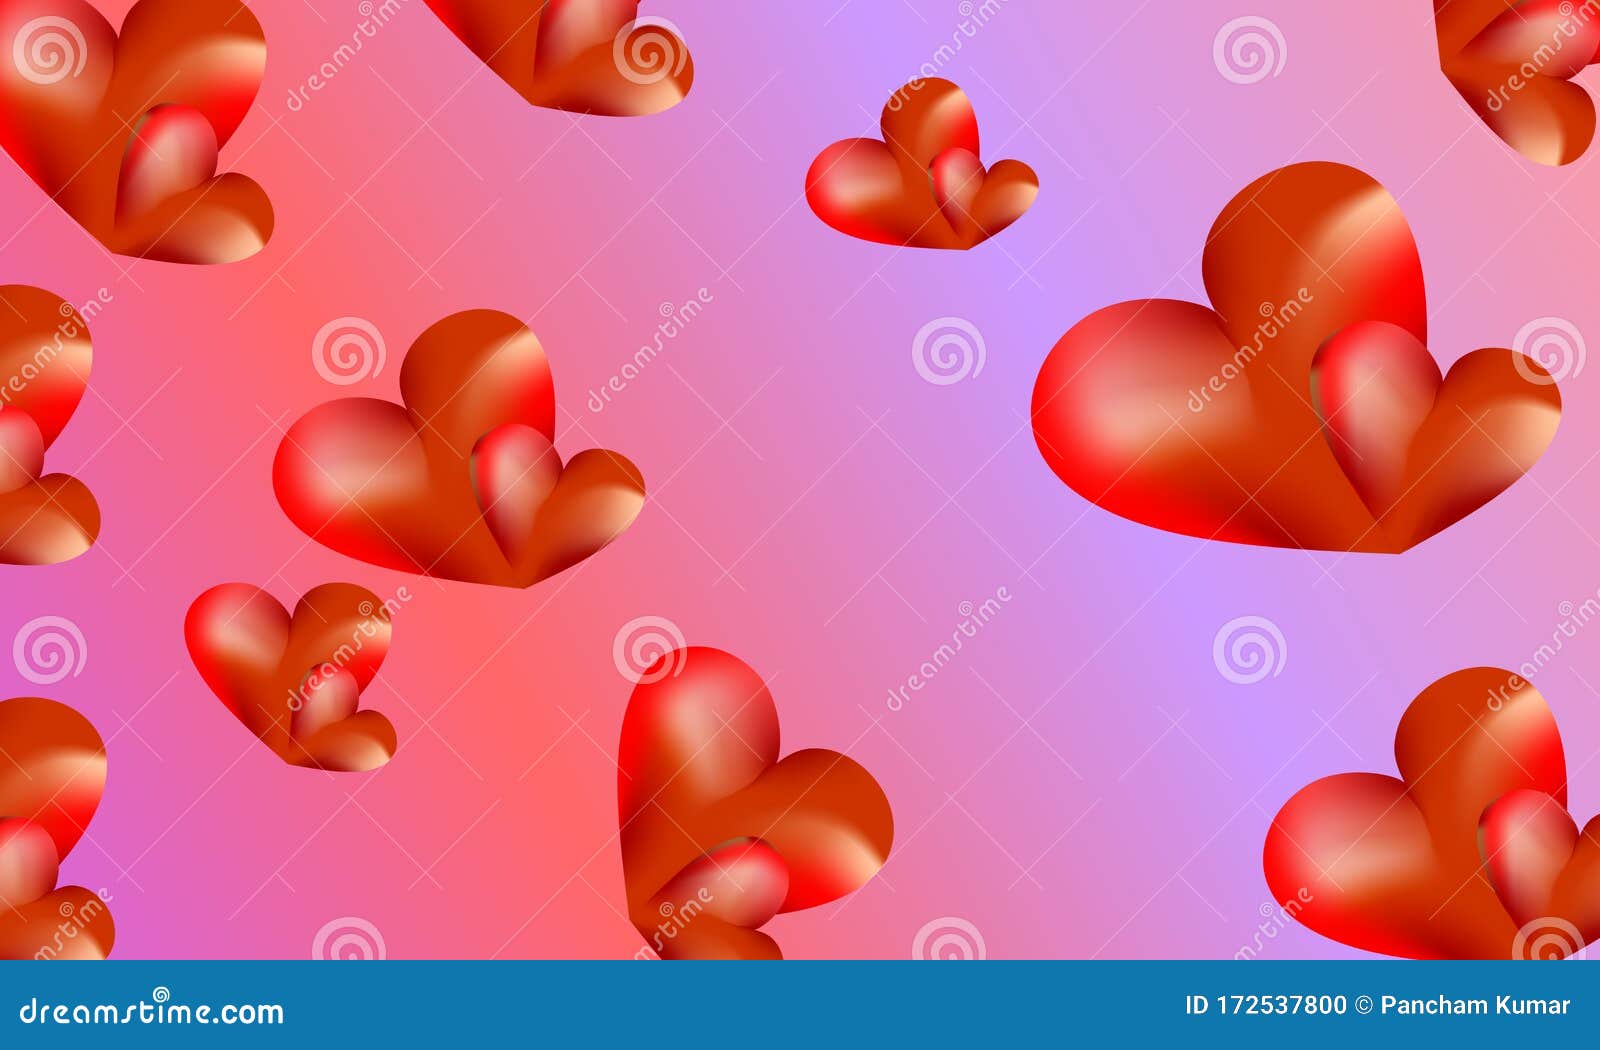 red heart with light pink background